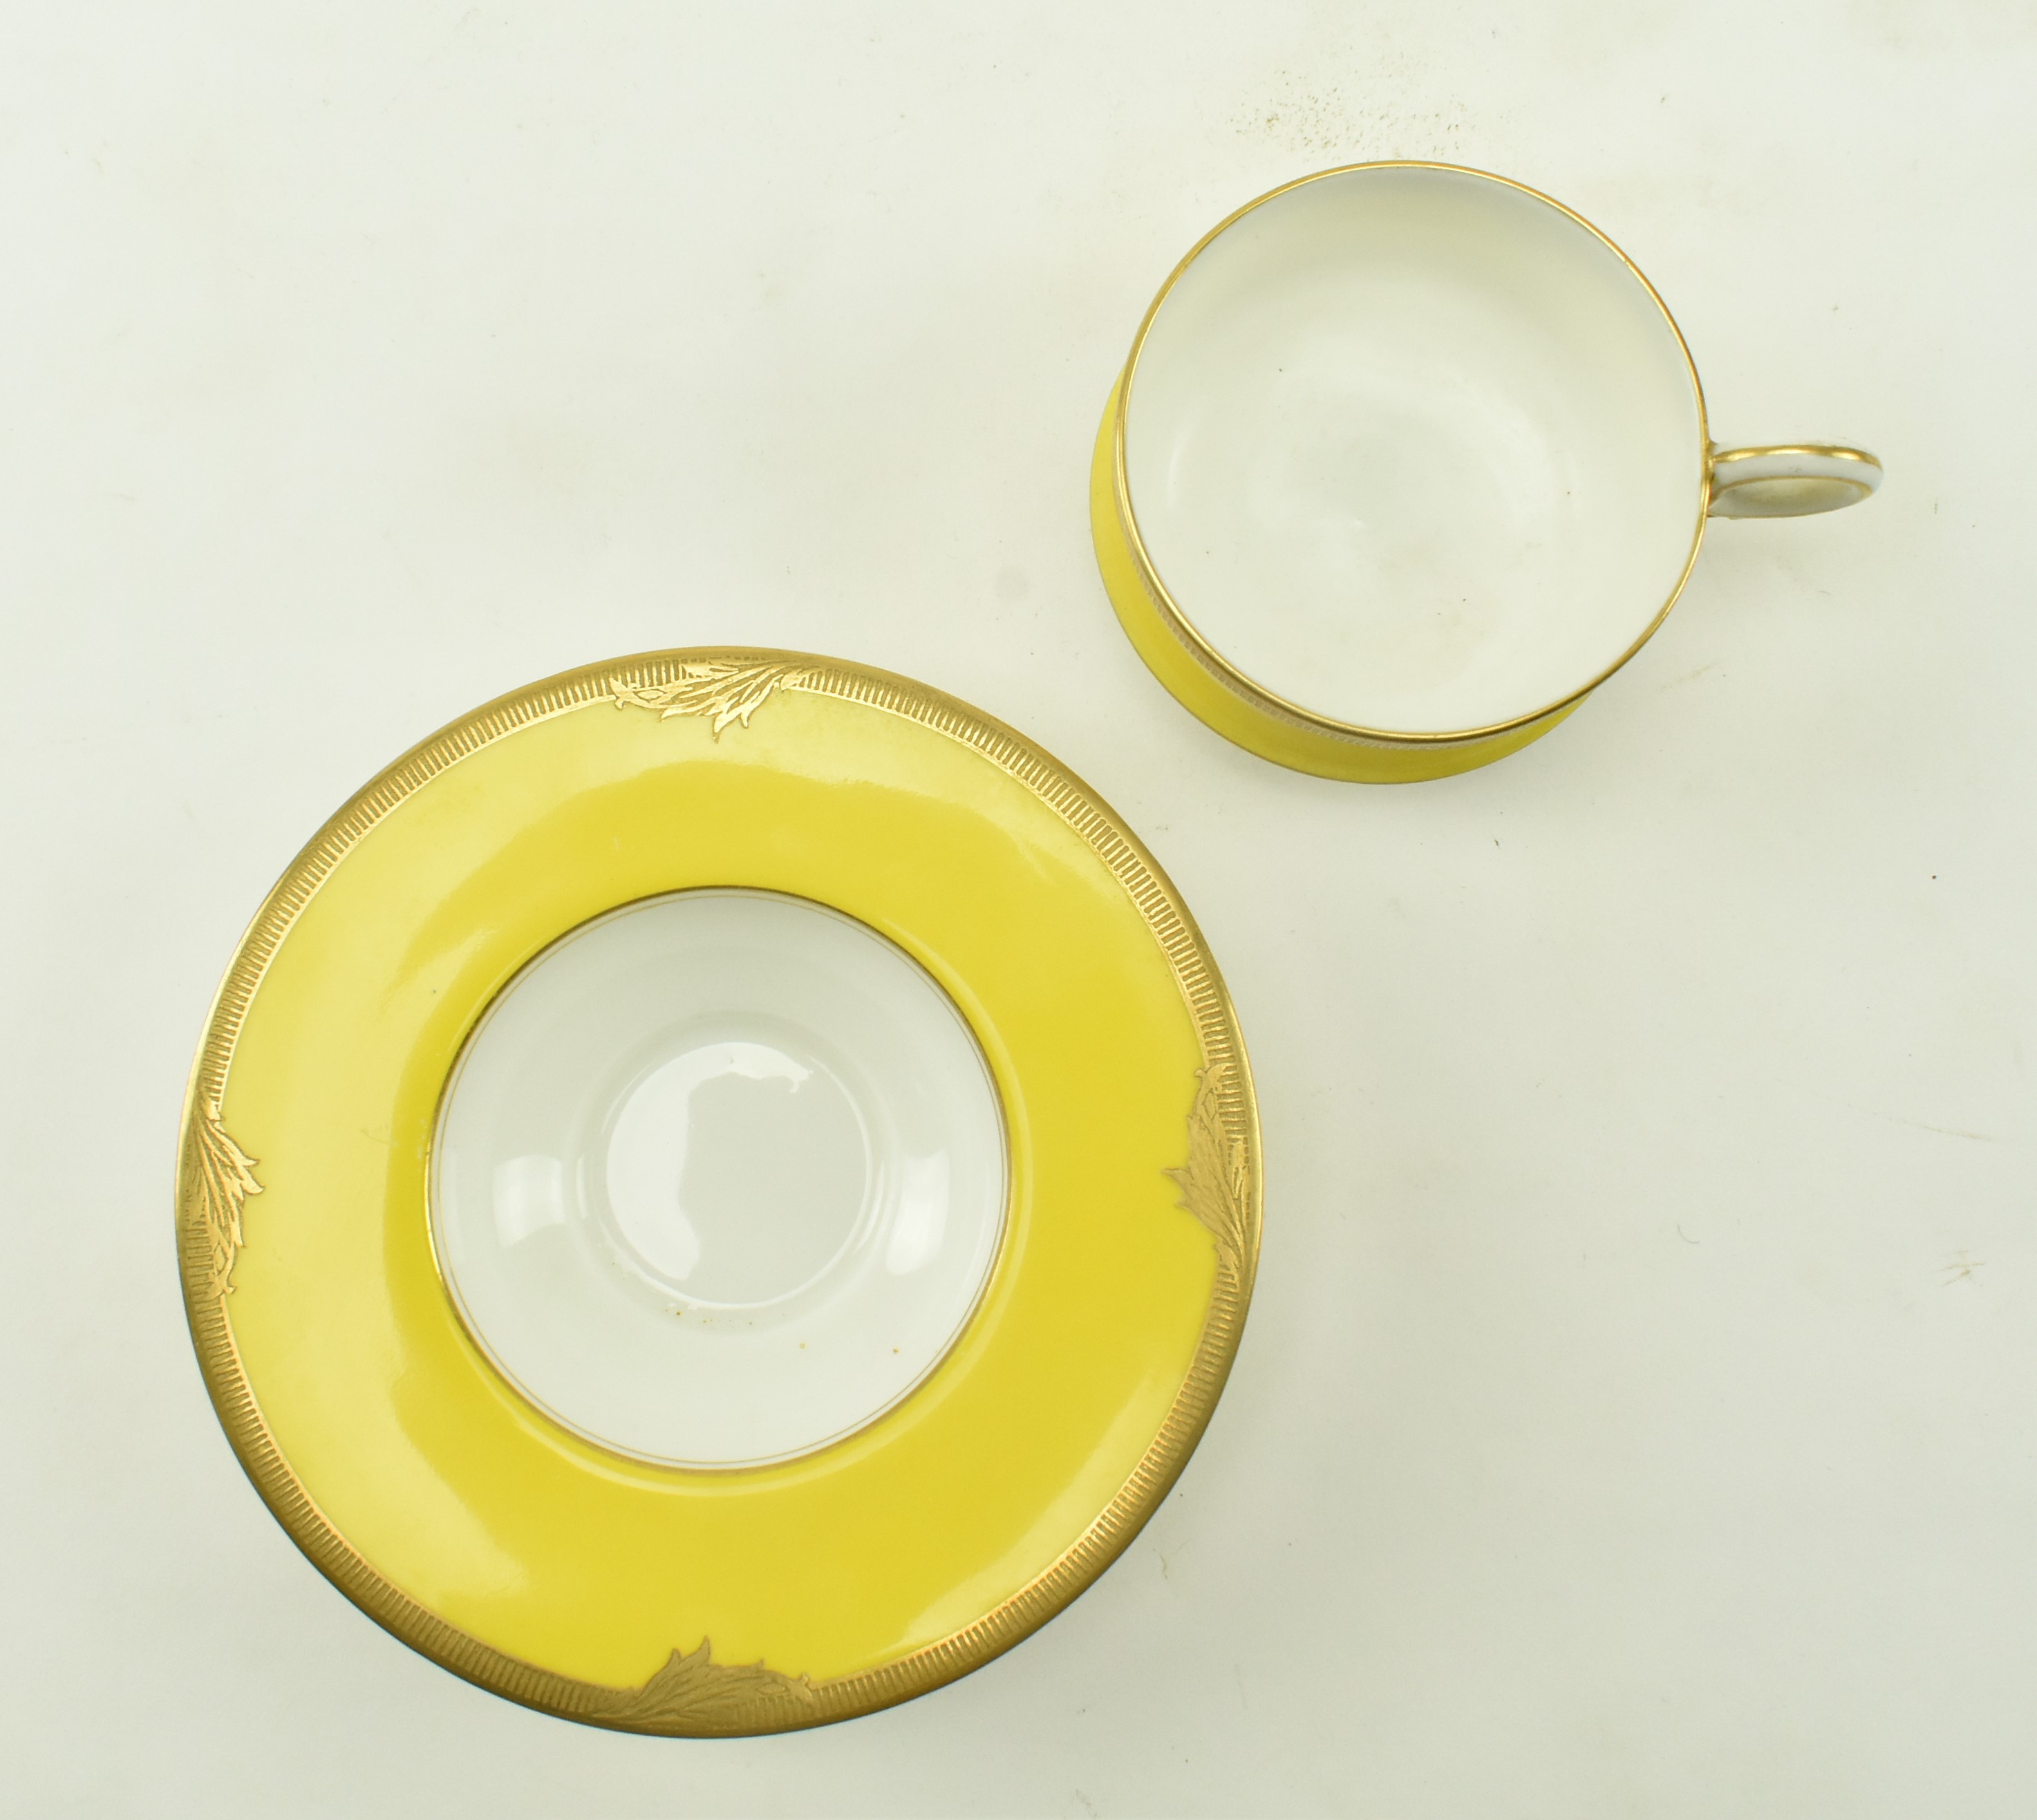 EARLY 20TH CENTURY ROYAL WORCESTER YELLOW TEACUP & SAUCER - Image 5 of 7